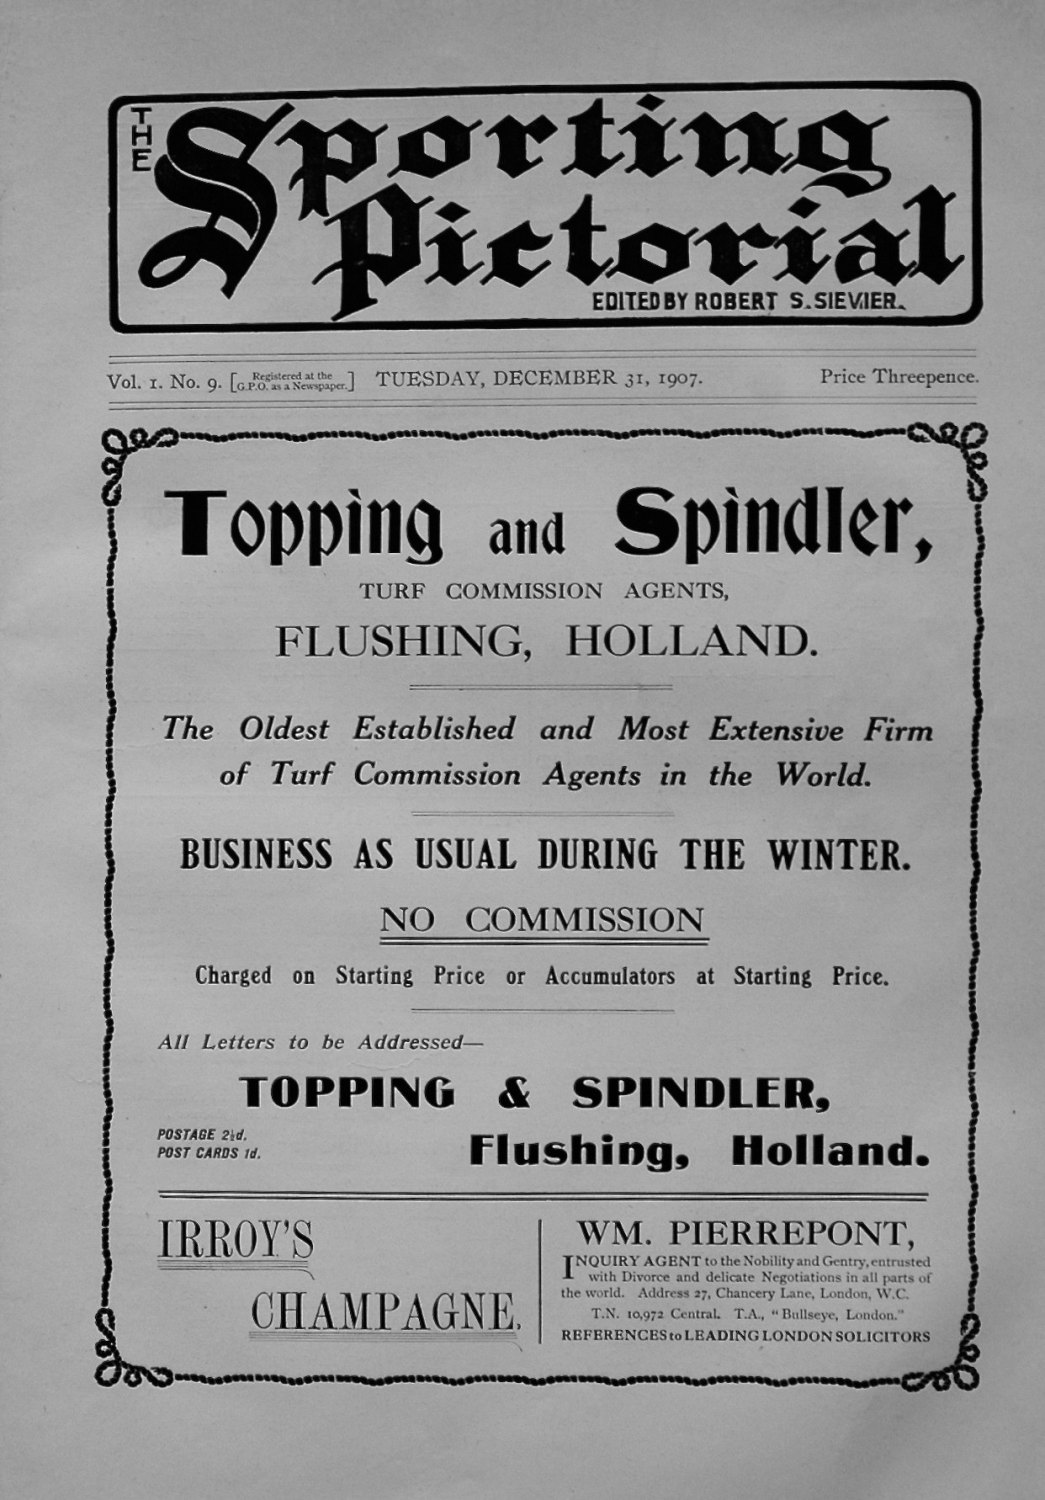 Sporting Pictorial. No. 9. December 31st 1907.